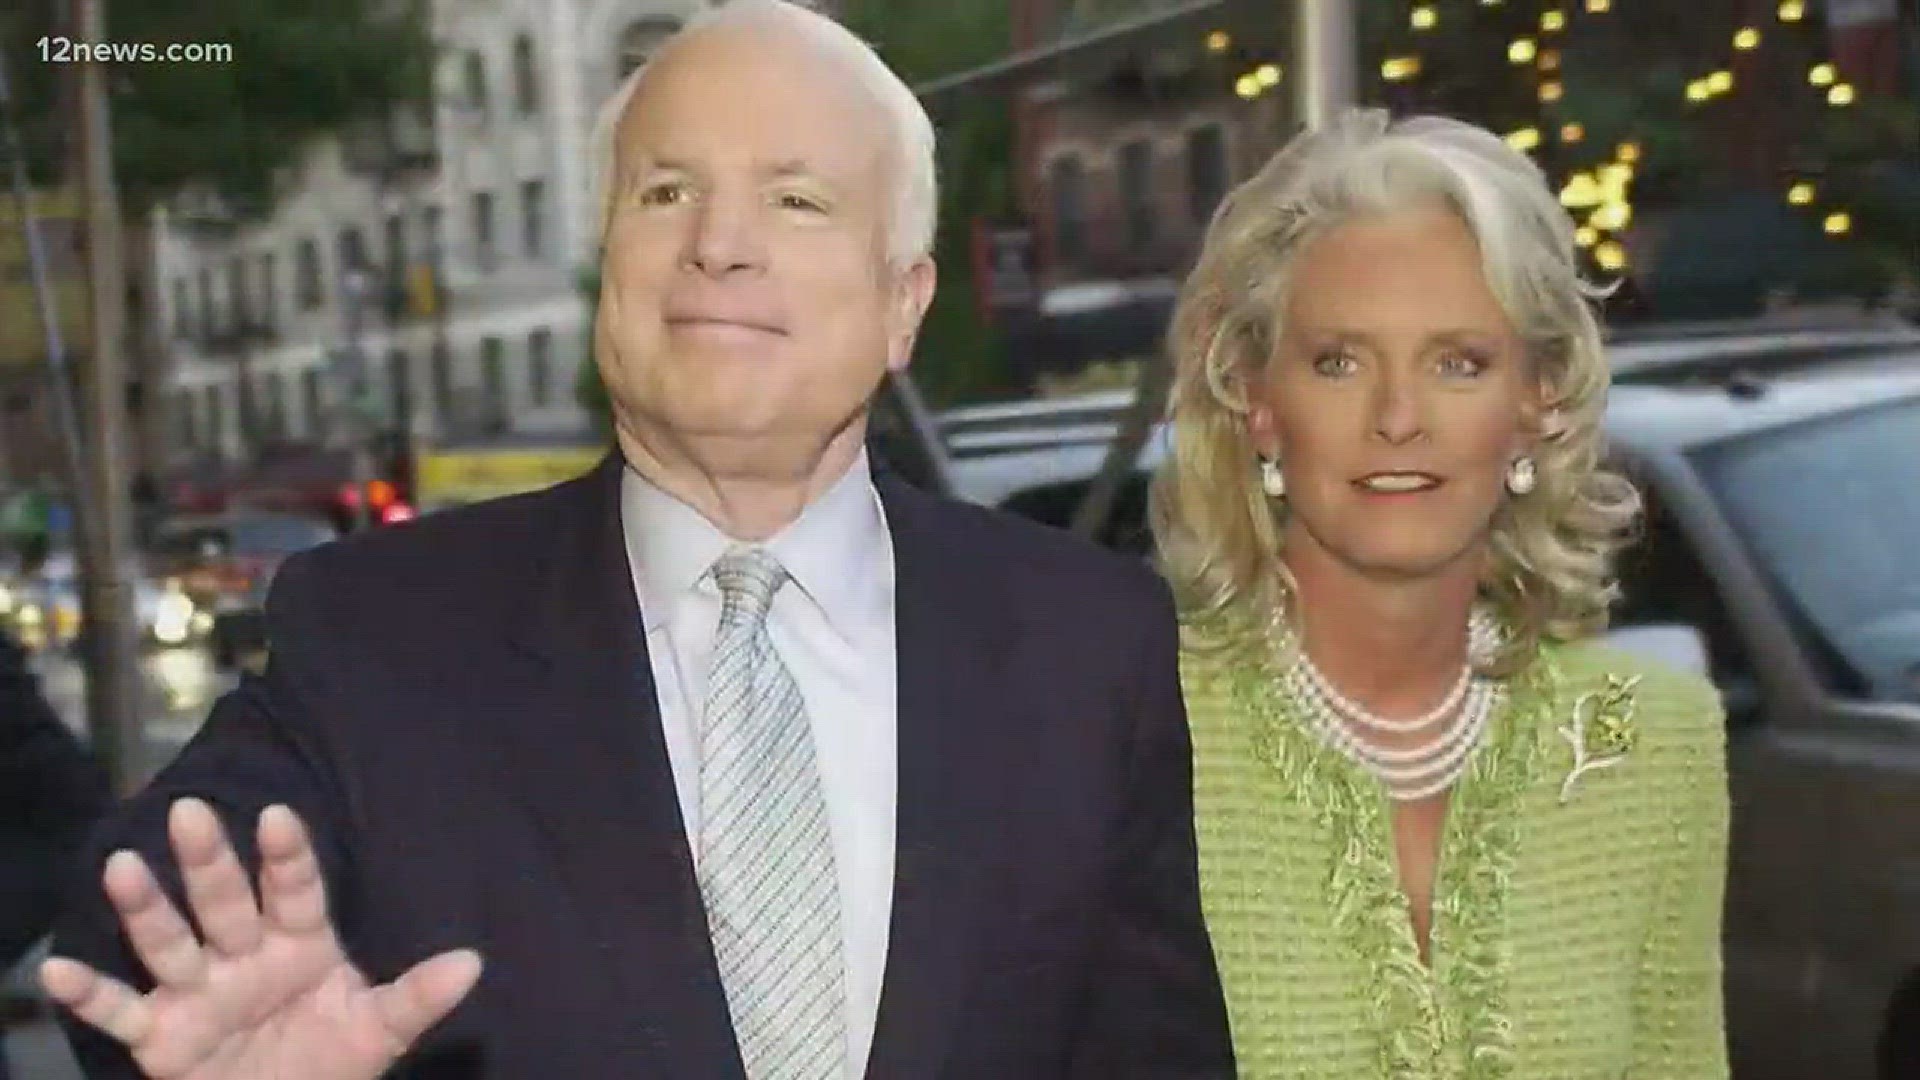 John McCain hospitalized for cancer treatment side effects 12news pic